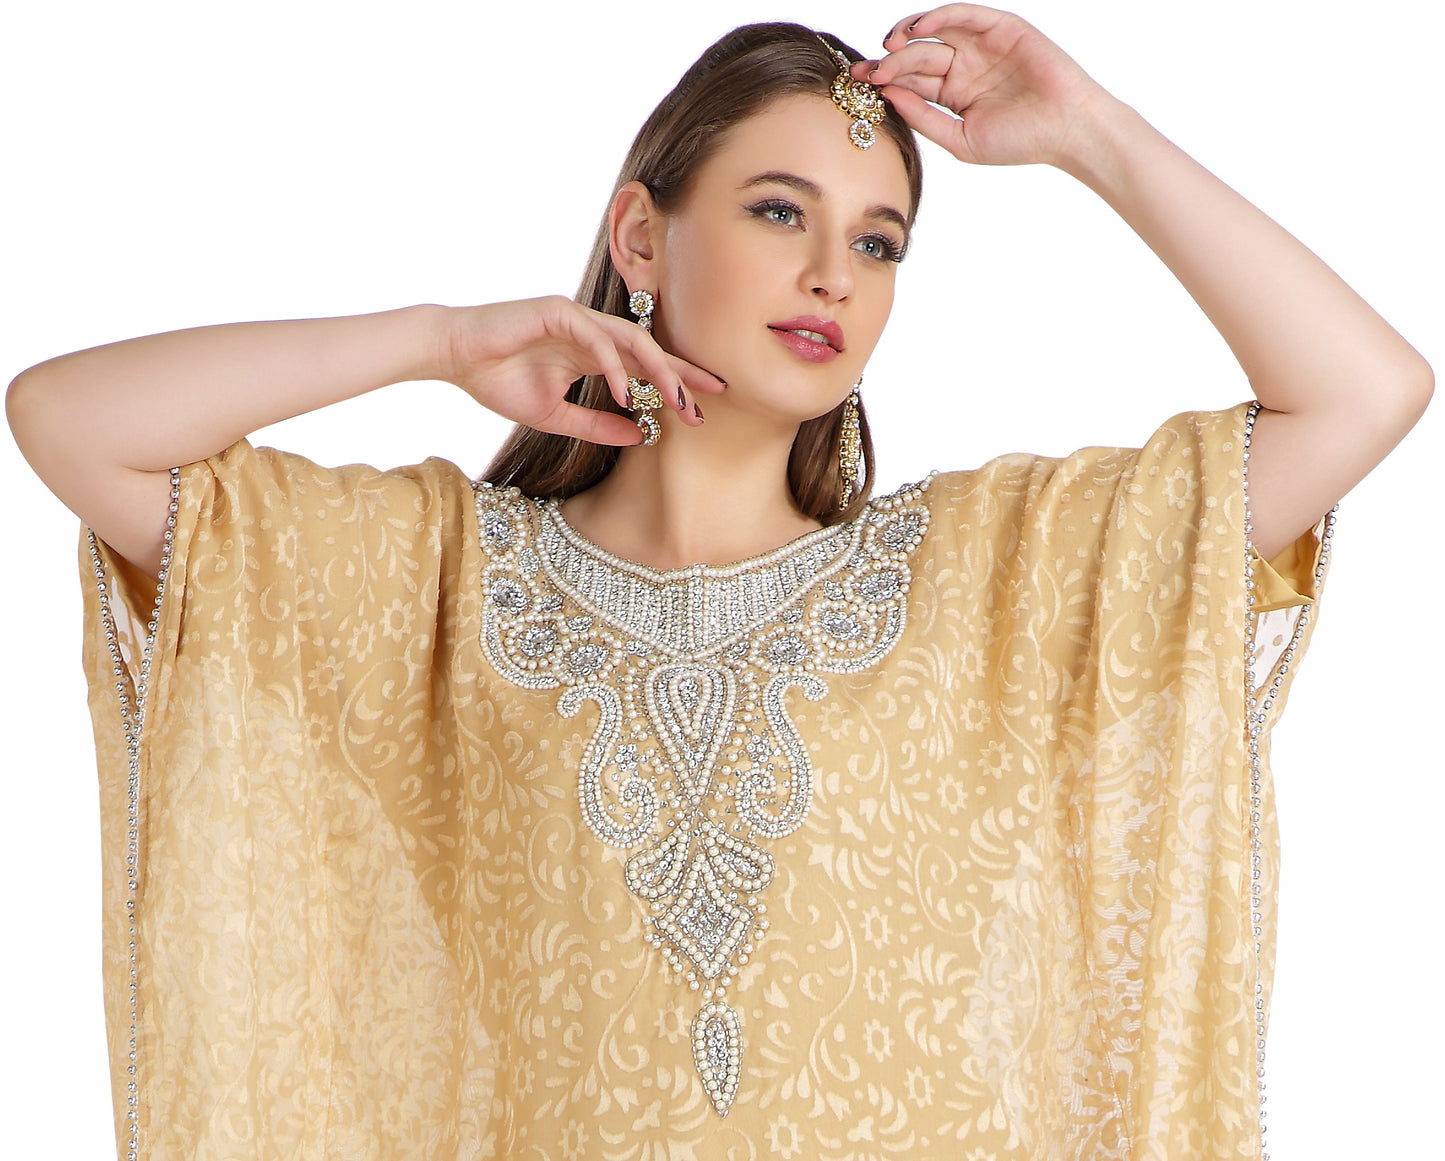 Party Caftan in Beige Brasso Printed Maxi Gown - Maxim Creation